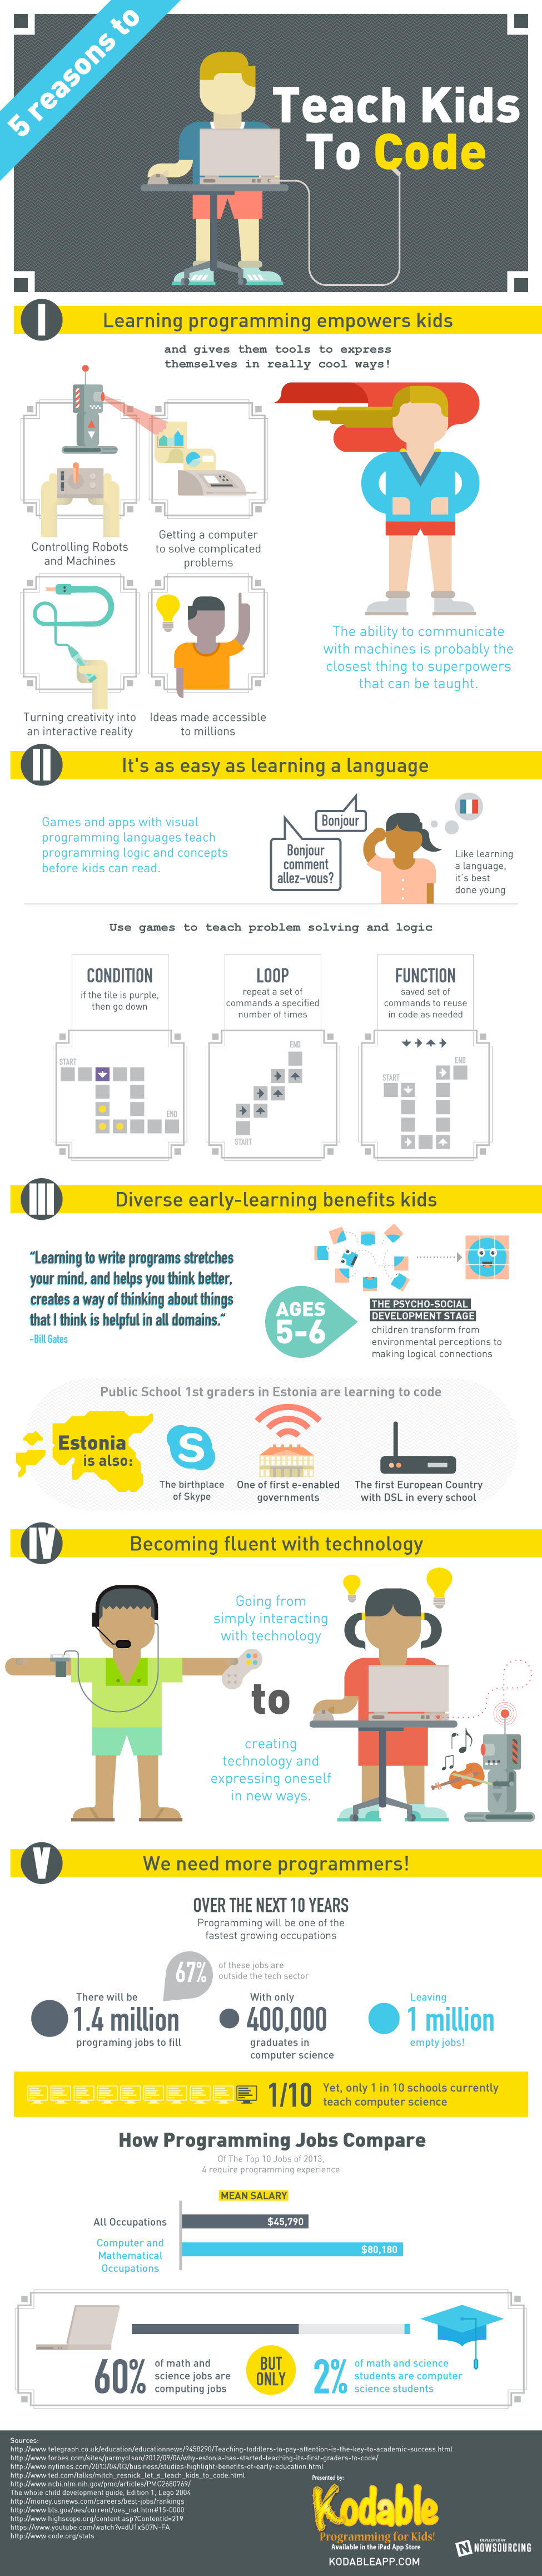 5 Reasons to Teach Kids to Code Infographic - e-Learning Infographics